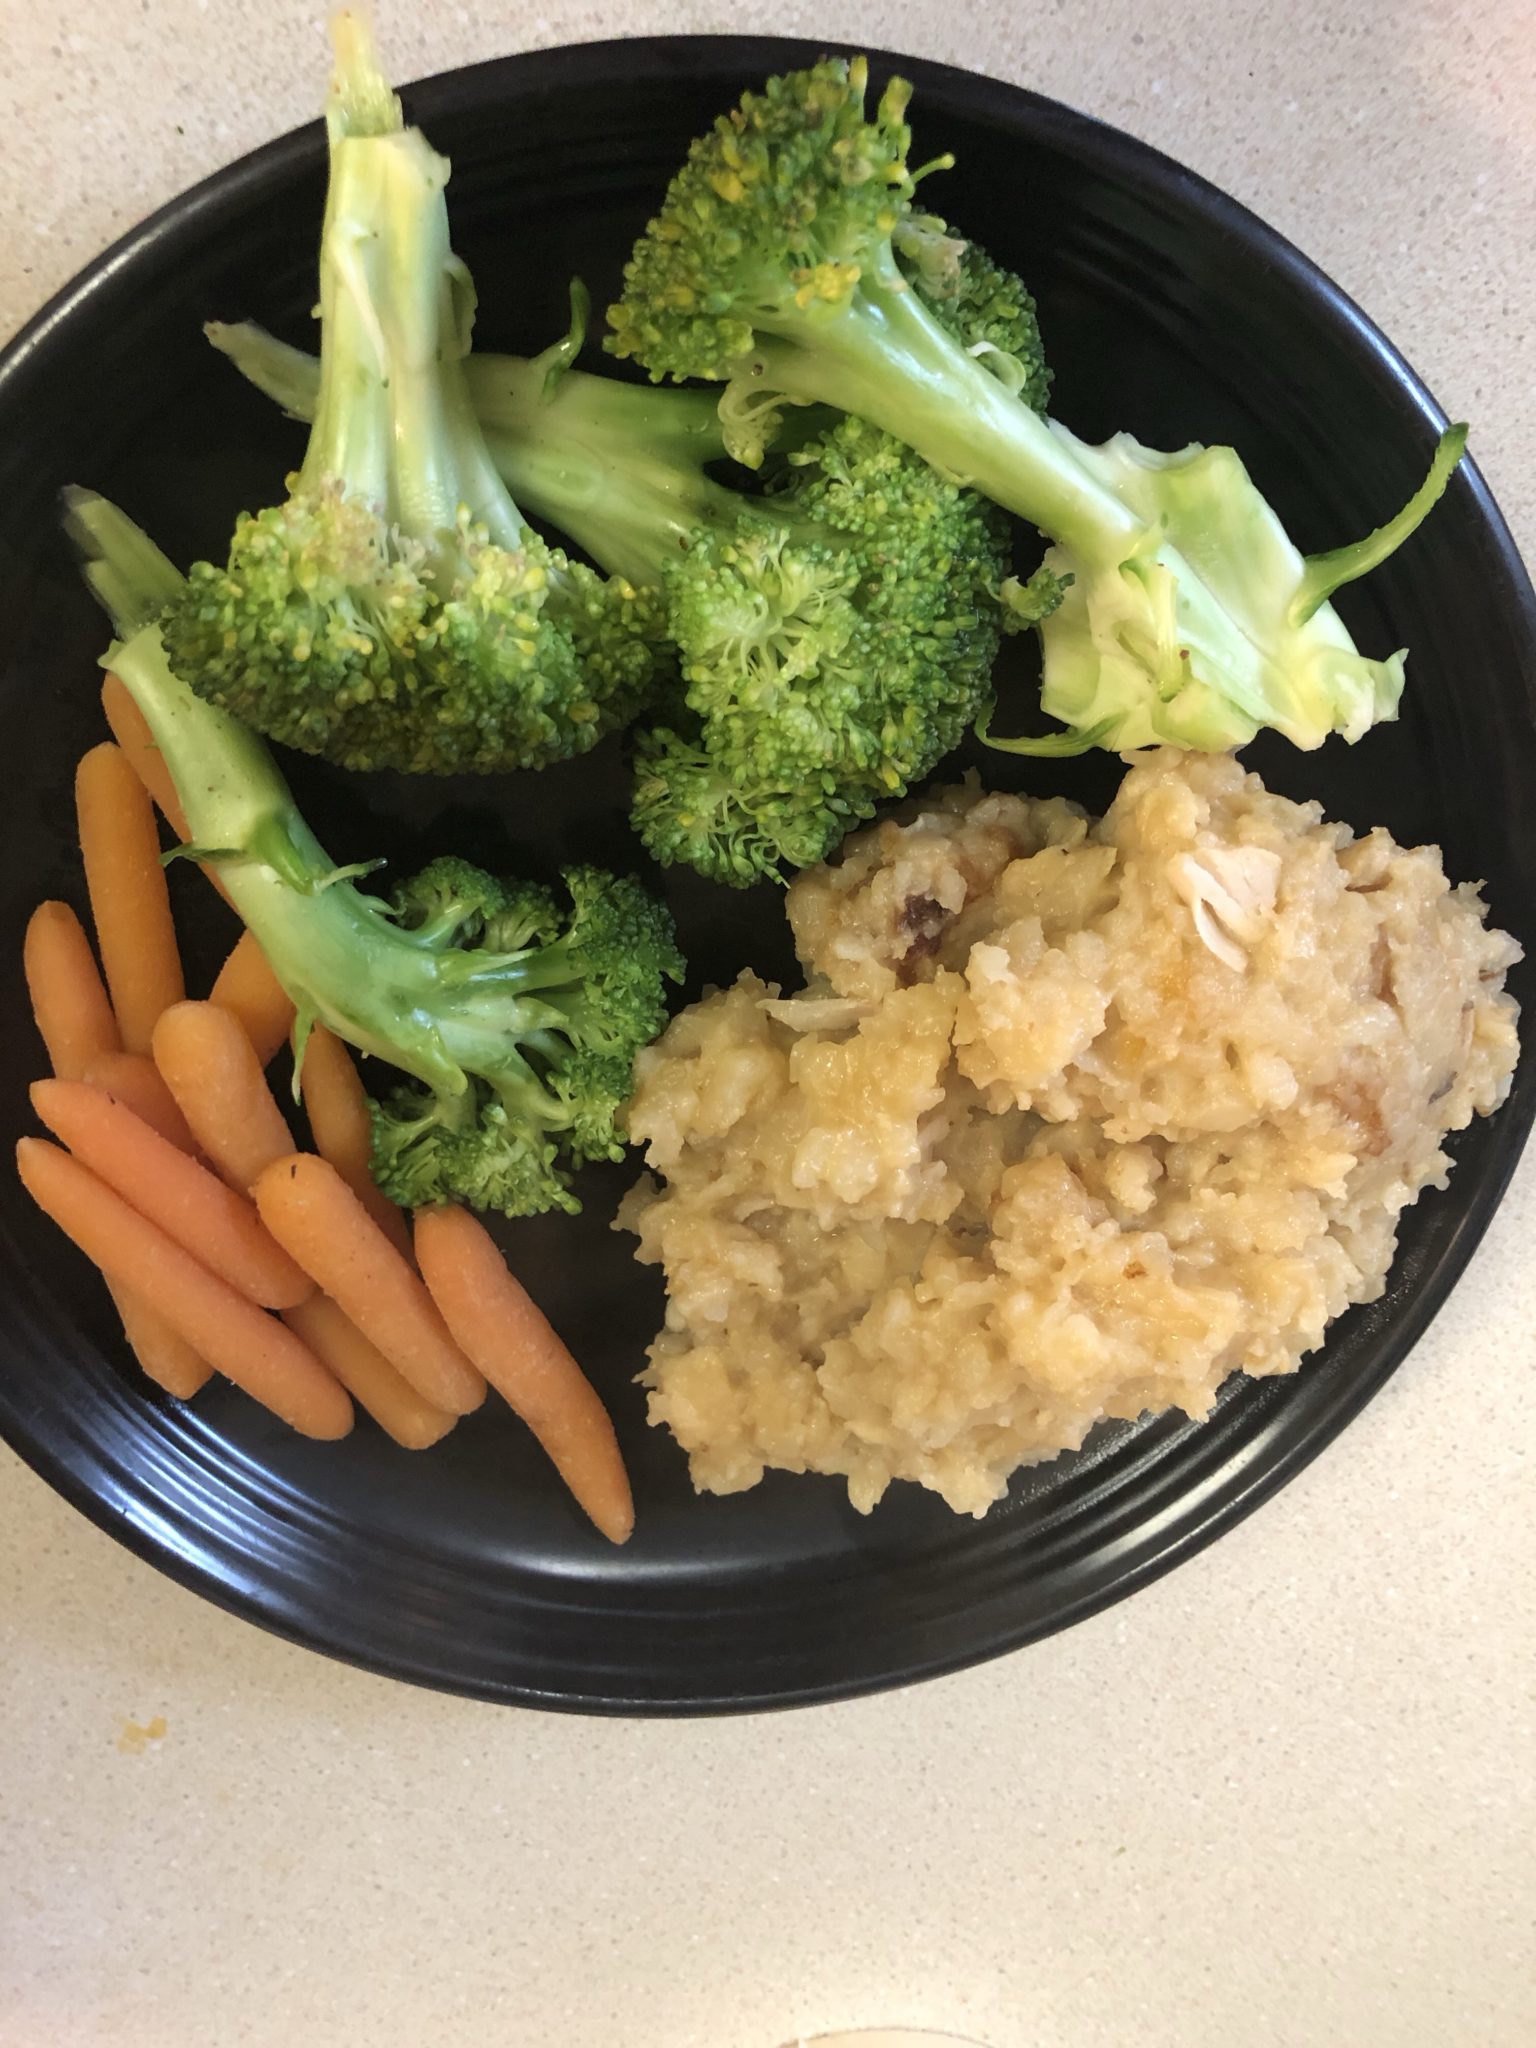 The casserole, broccoli and carrots on a plate.